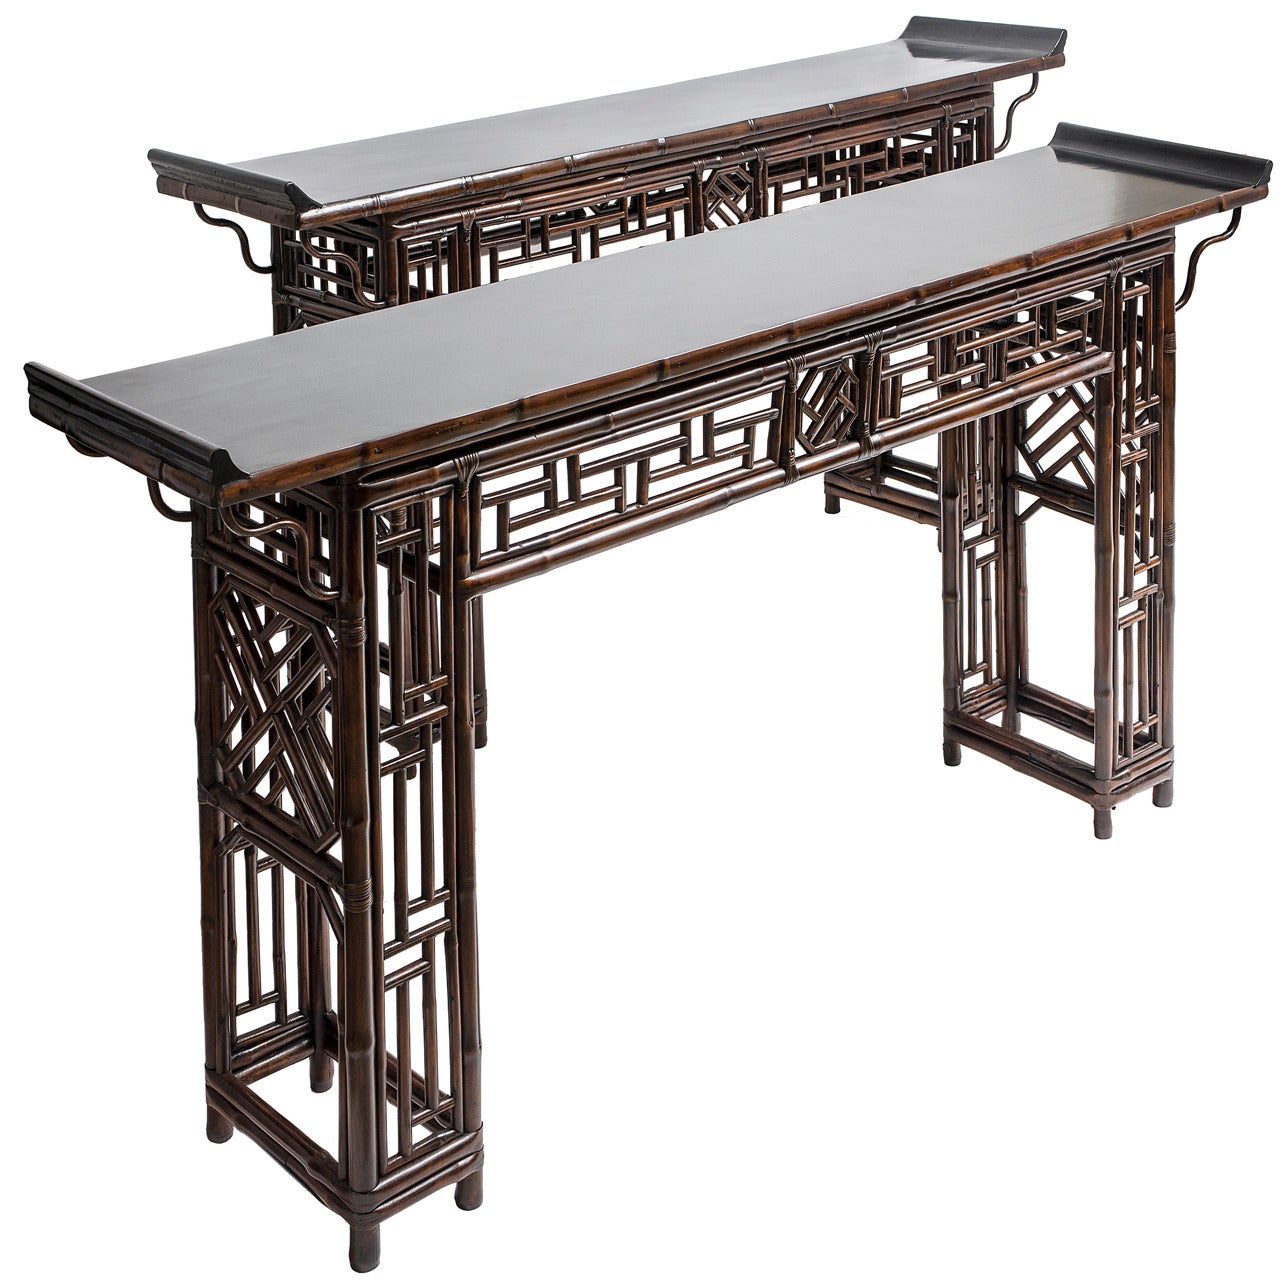 Pair of Chinese Bamboo Geometric Design Altar Tables, circa 1900